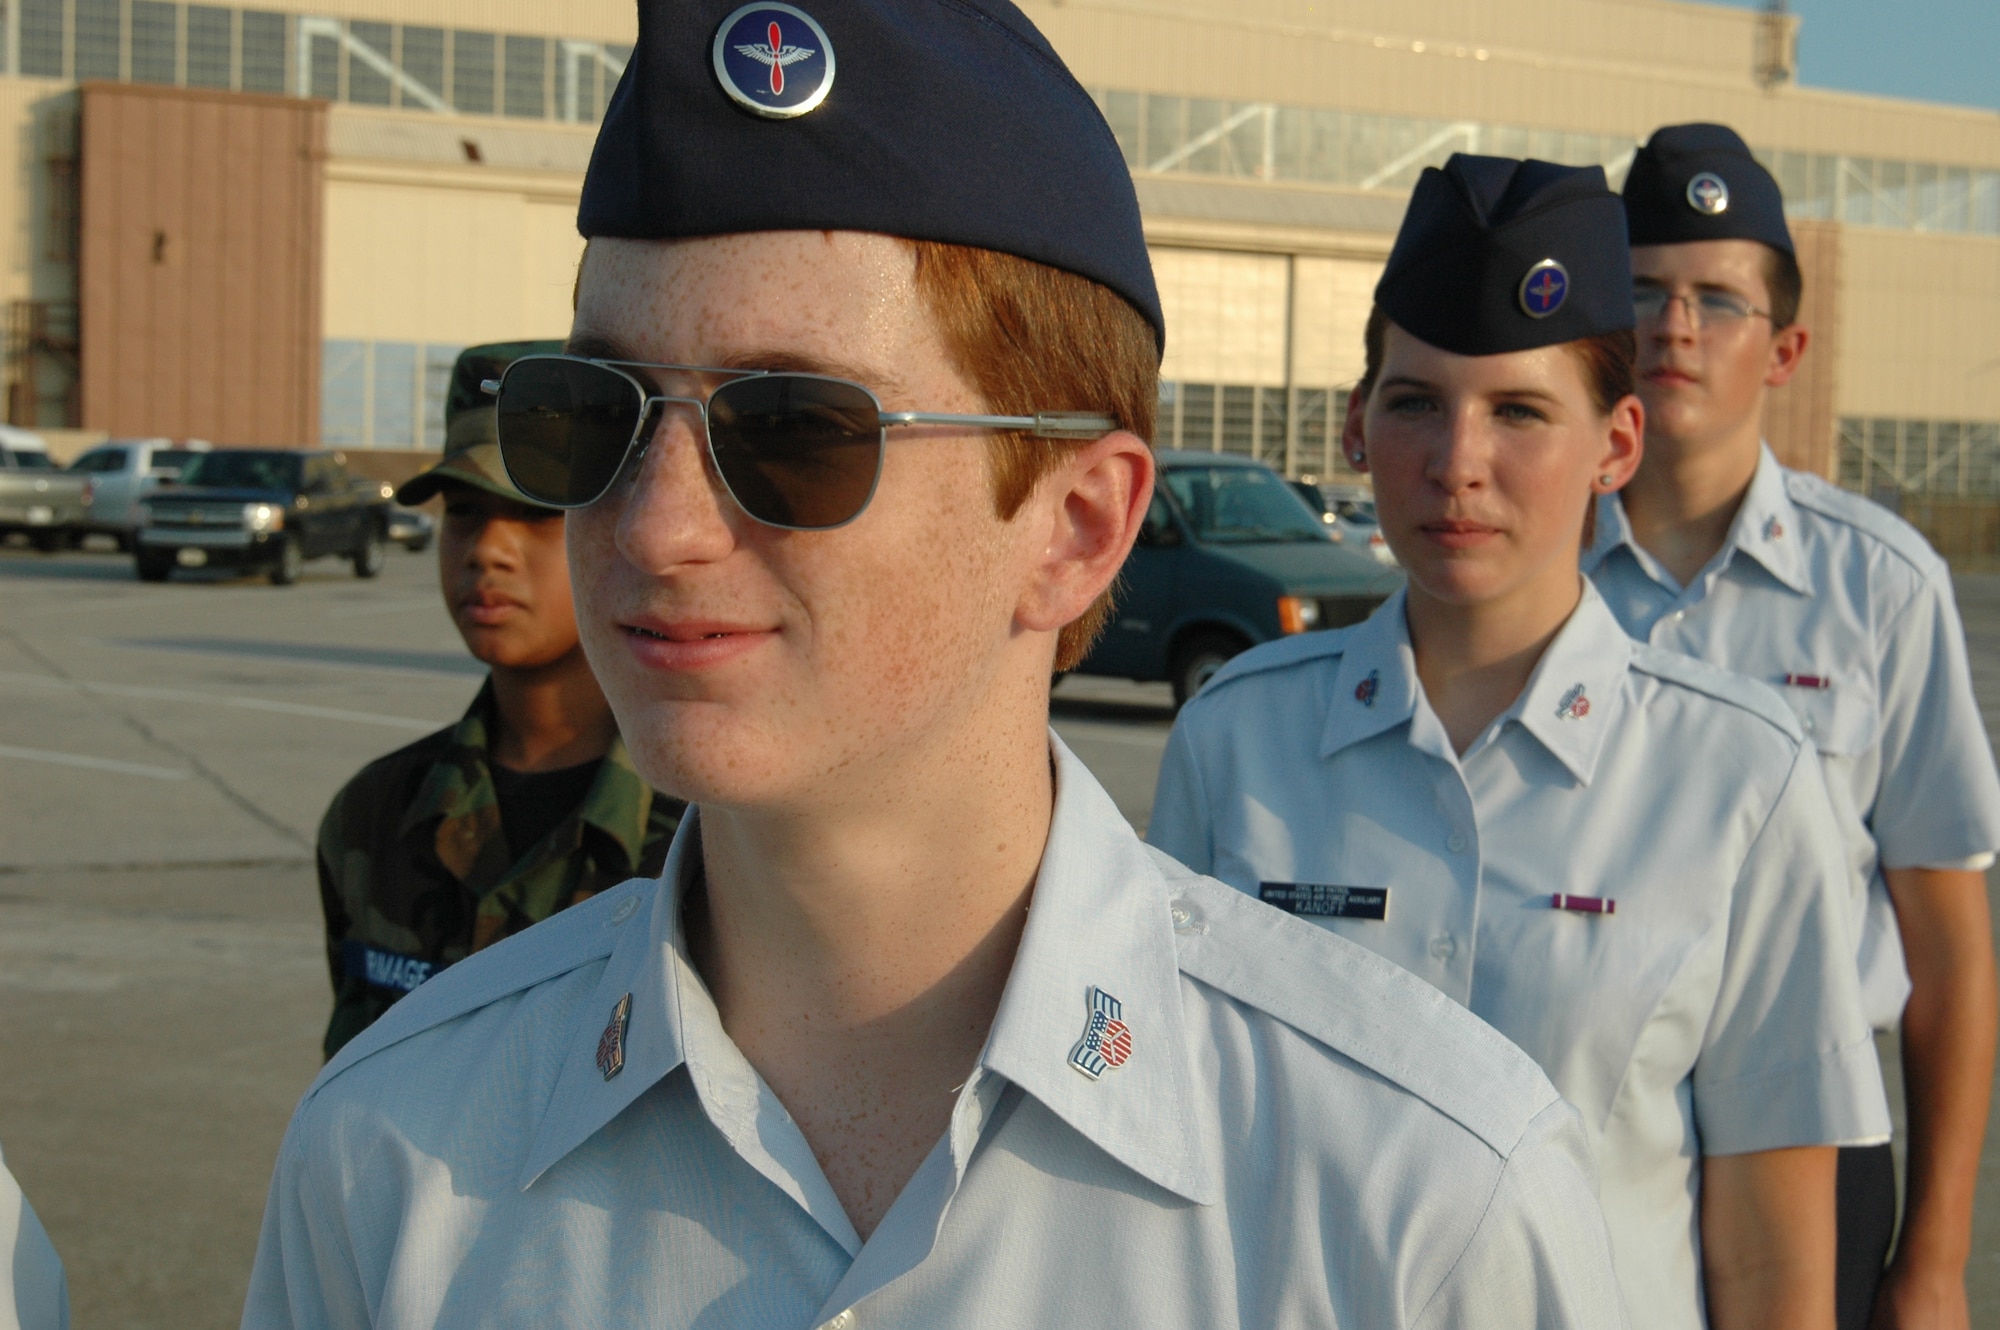 Cadet Airman Crothers and other CAP members practice formation during their weekly meeting at Tinker. CAP is the official auxiliary of the Air Force and as such has performed vital missions through the years, including spotting enemy subs and performing search and rescue operations.(Air Force photo by Howdy Stout)